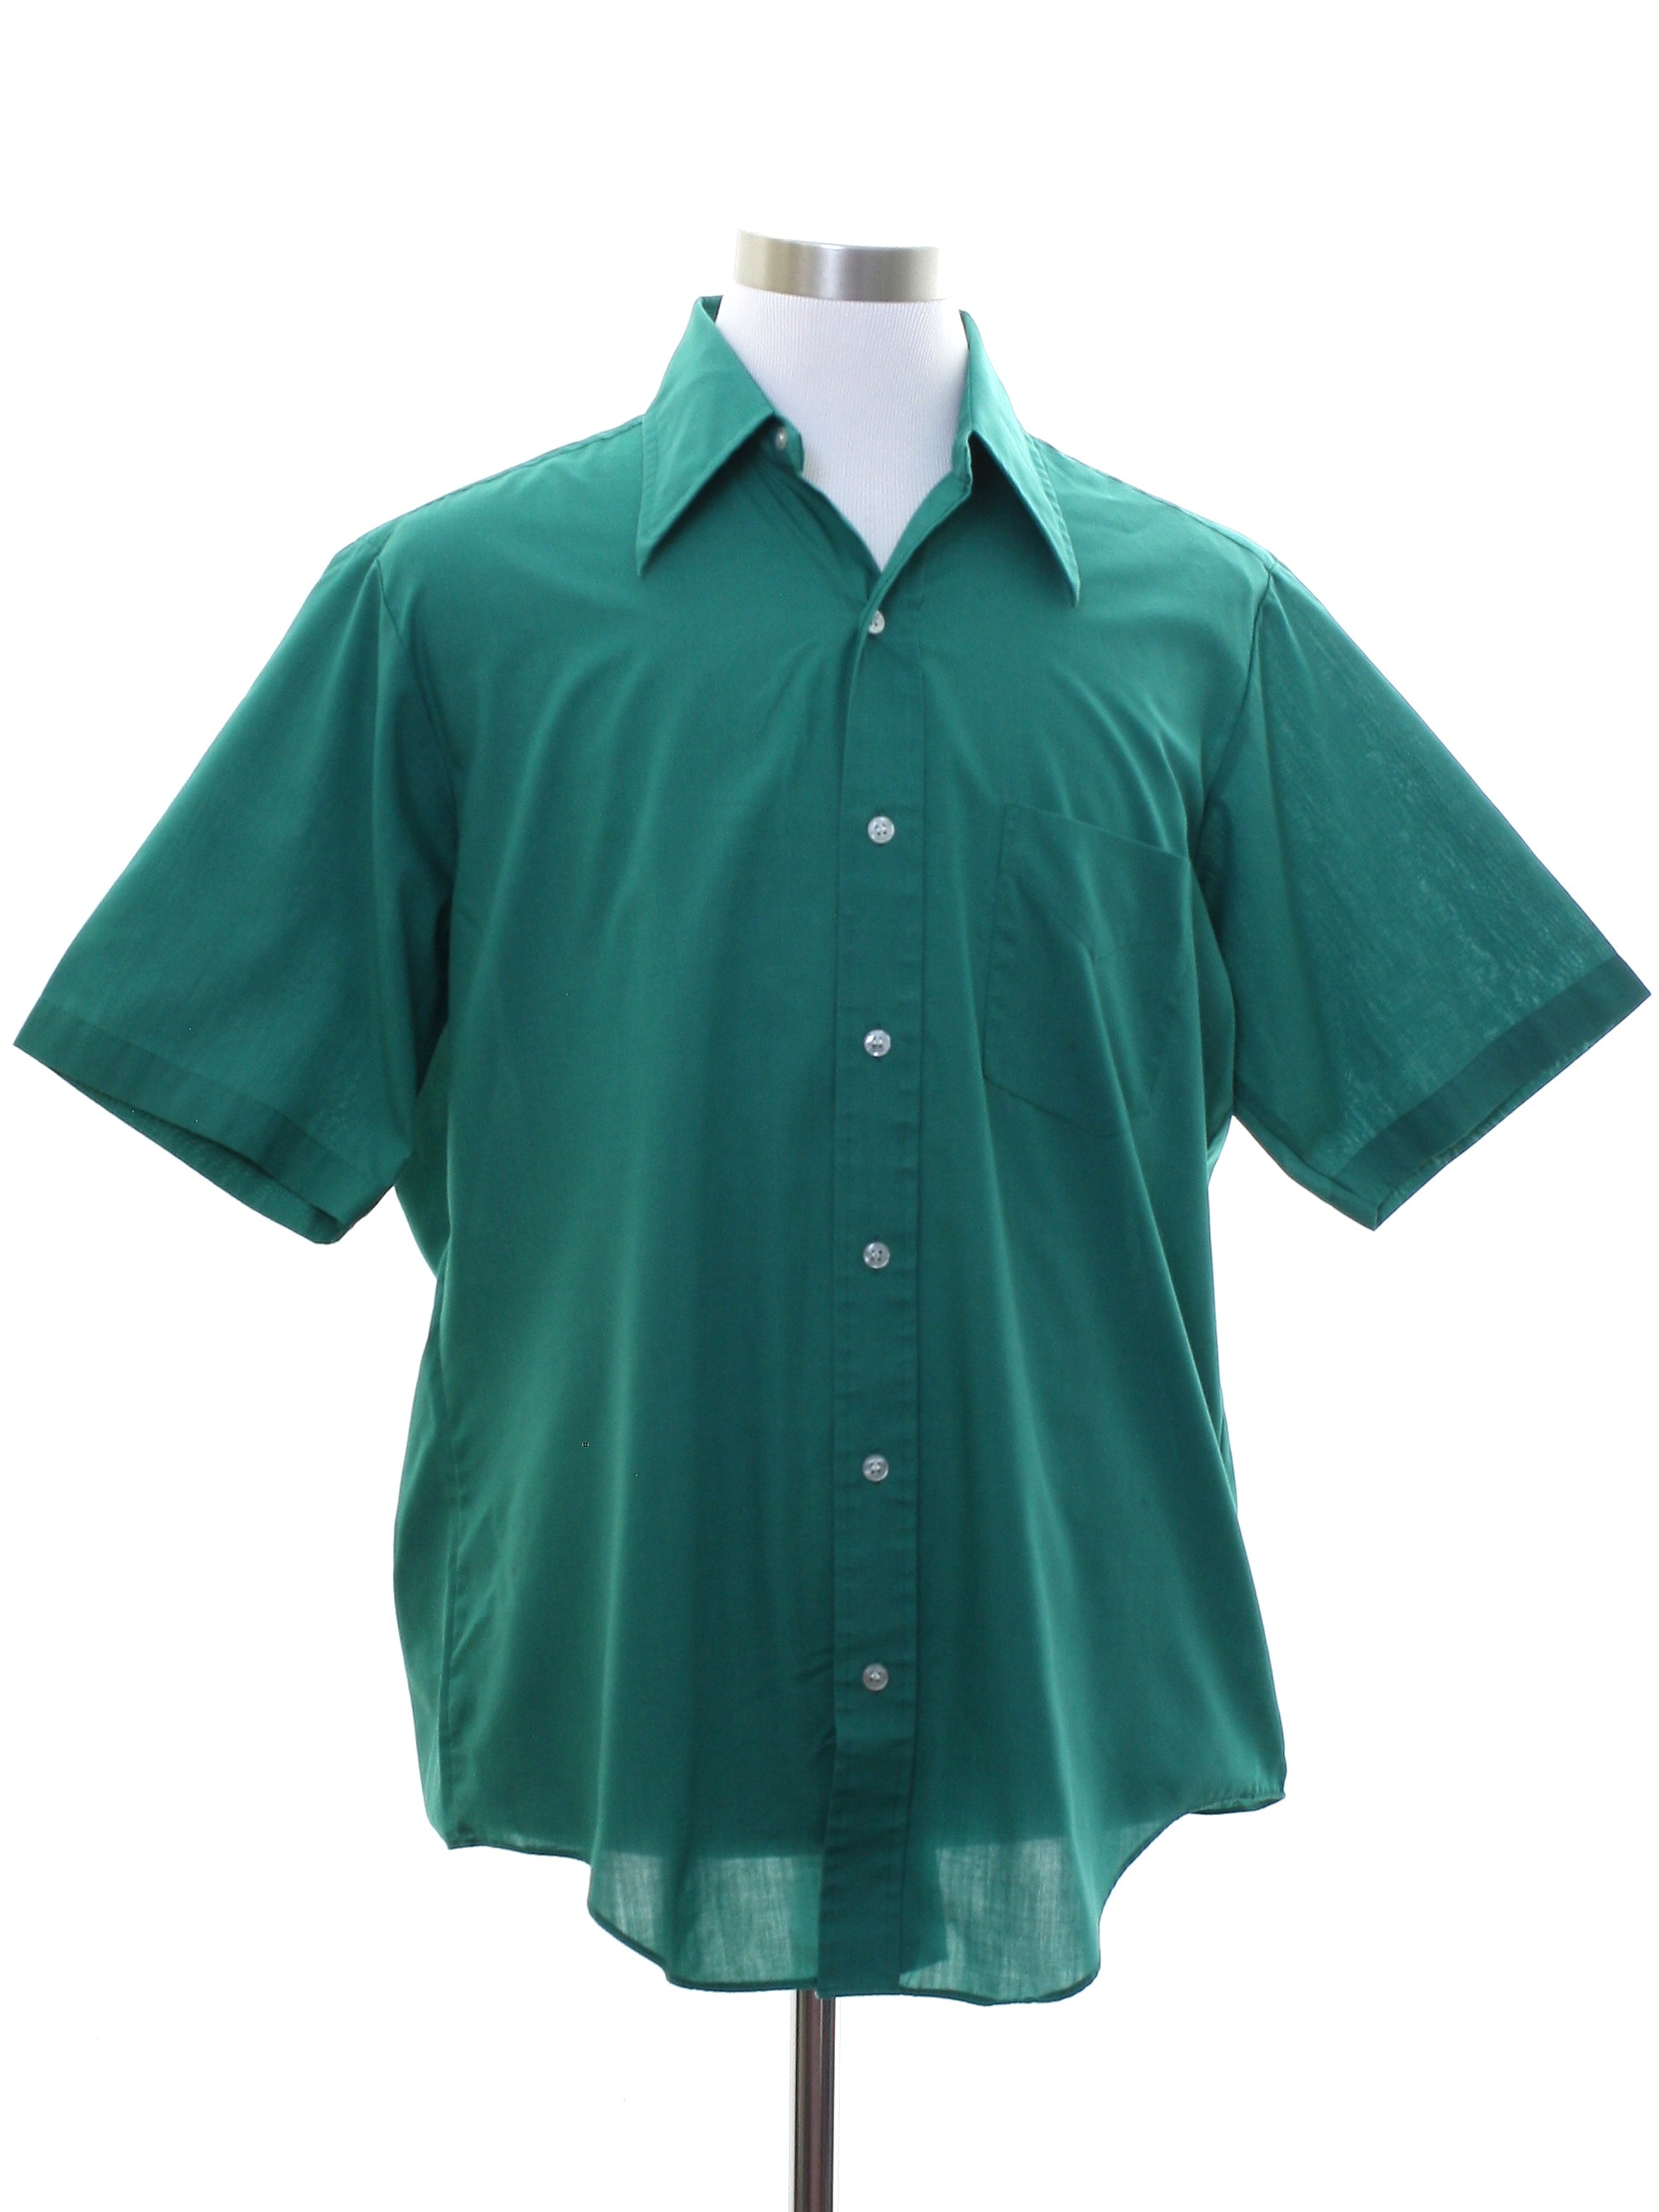 Vintage 1970's Shirt: 70s -Richman Brothers.- Mens emerald teal ...